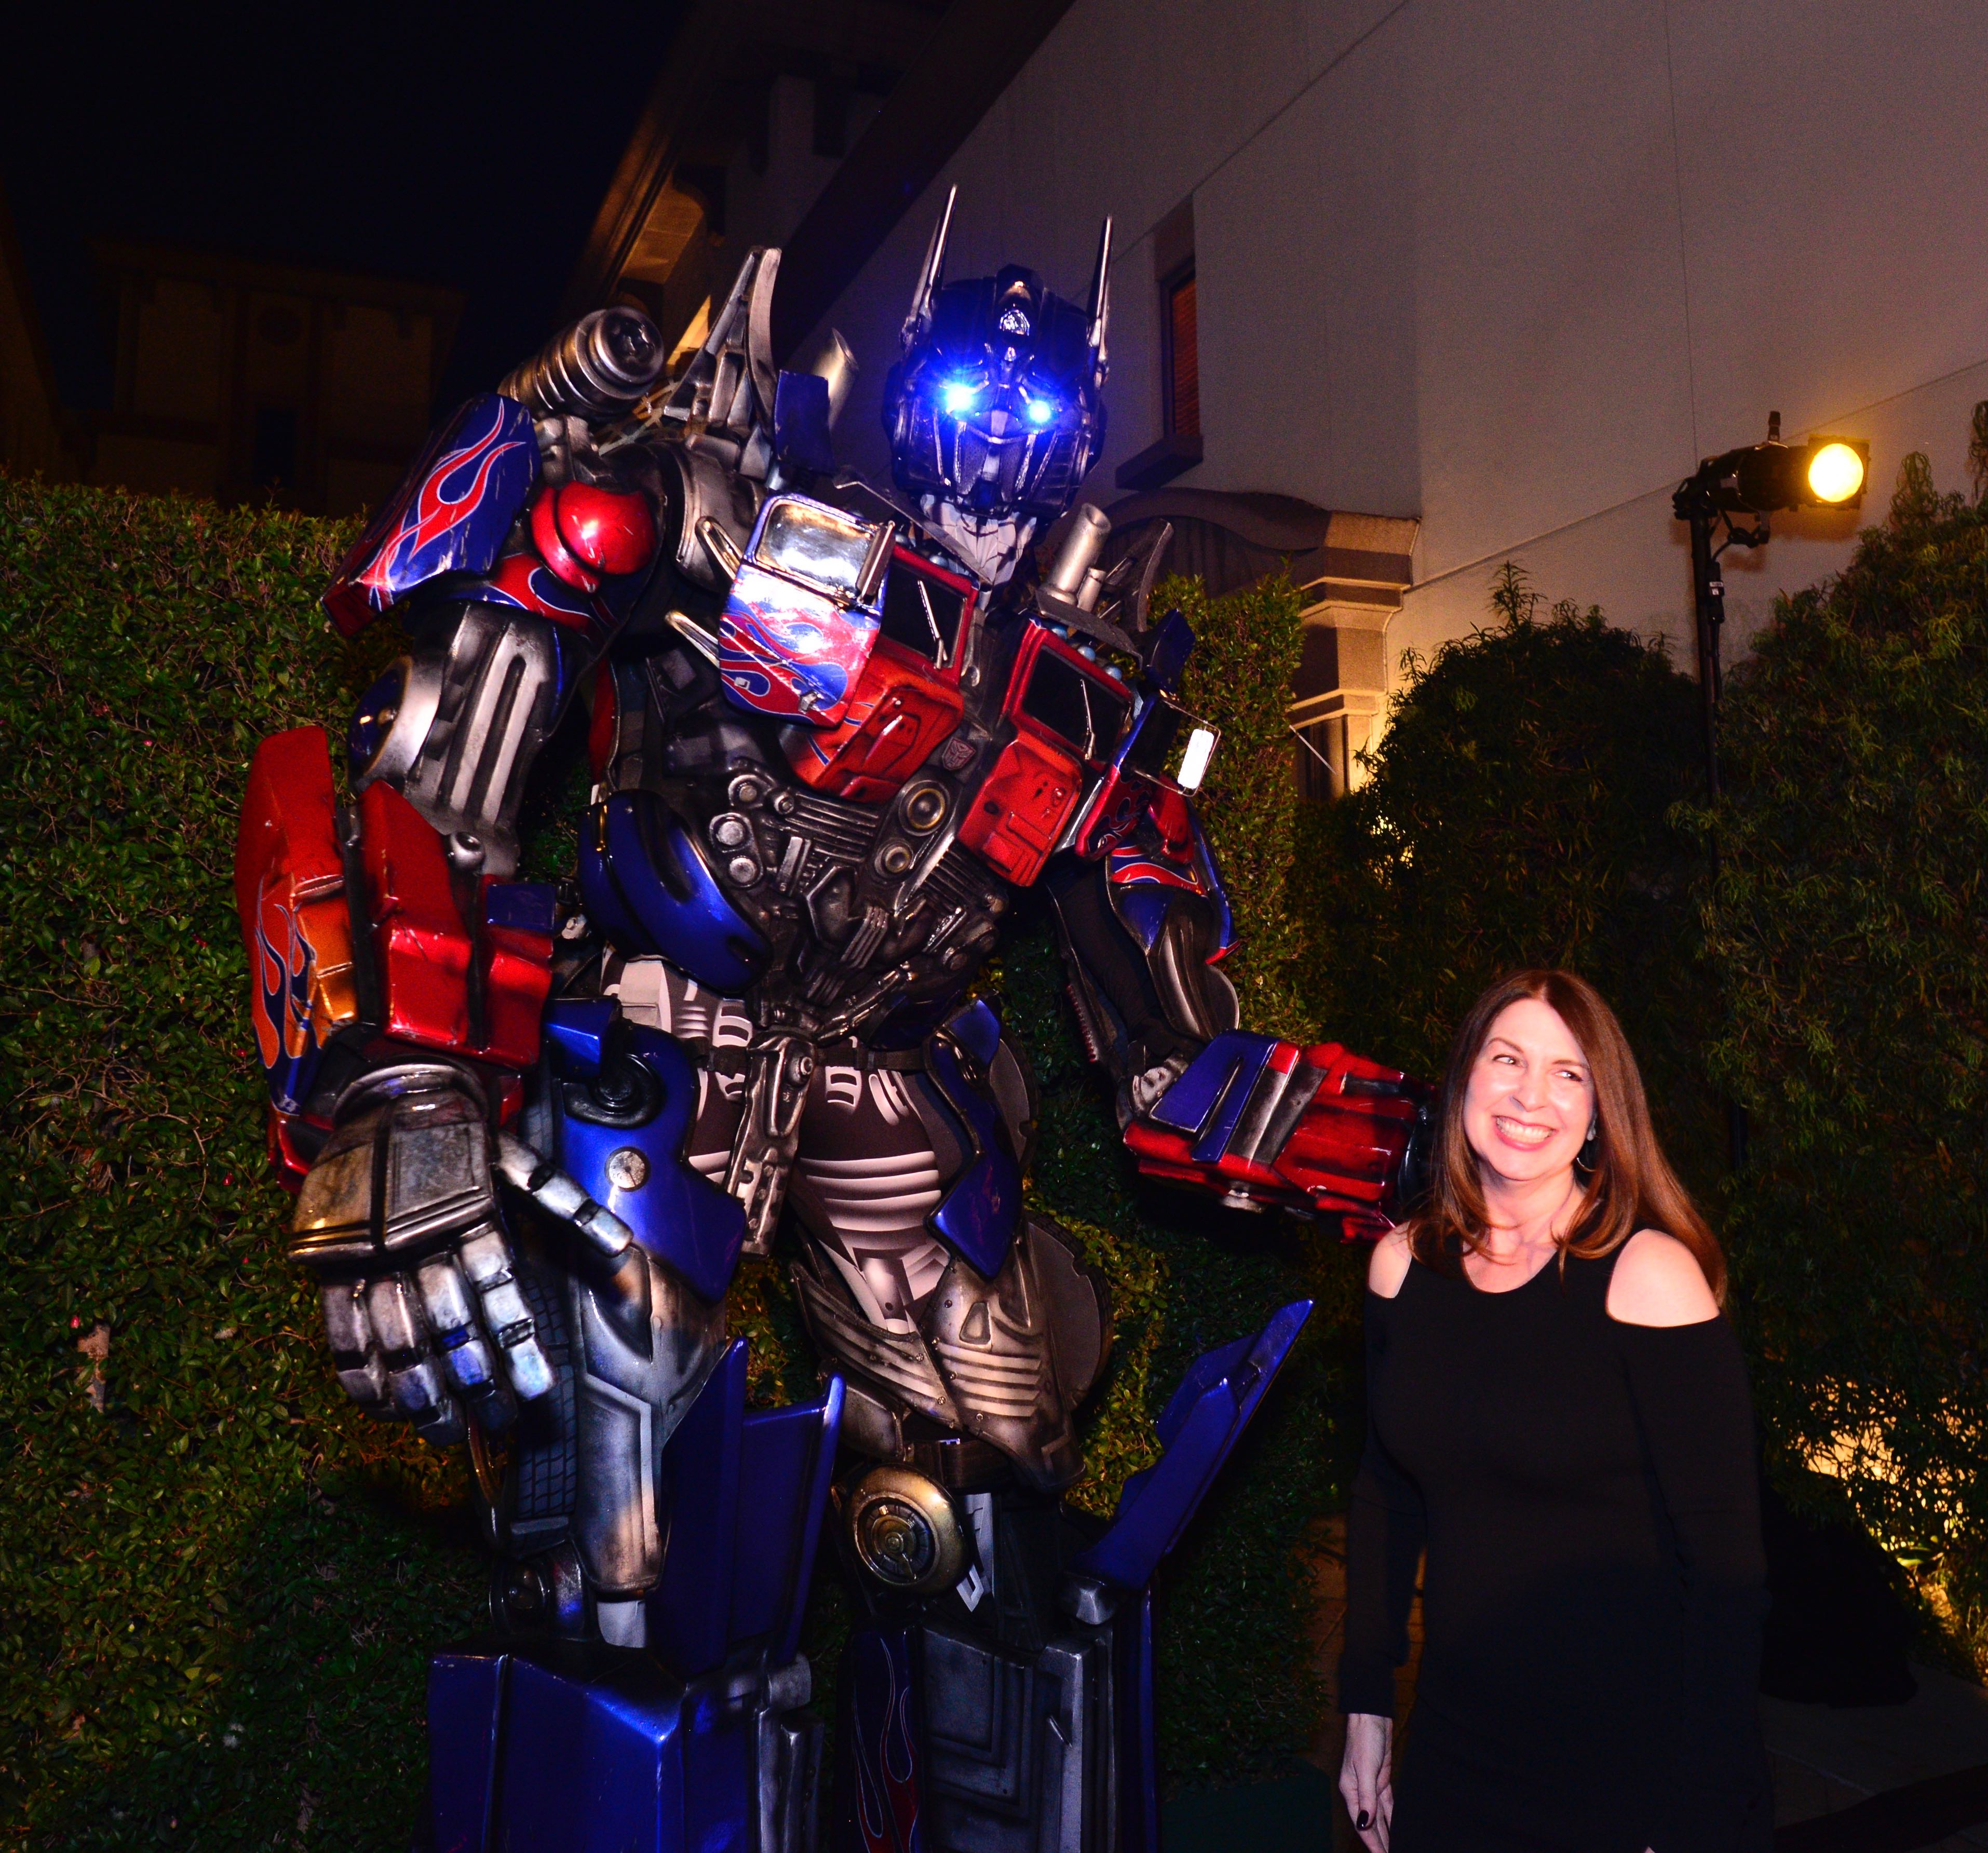 TRANSFORMERS Character Optimus Prime Interacting with Guests - Photo: Martin Cohen